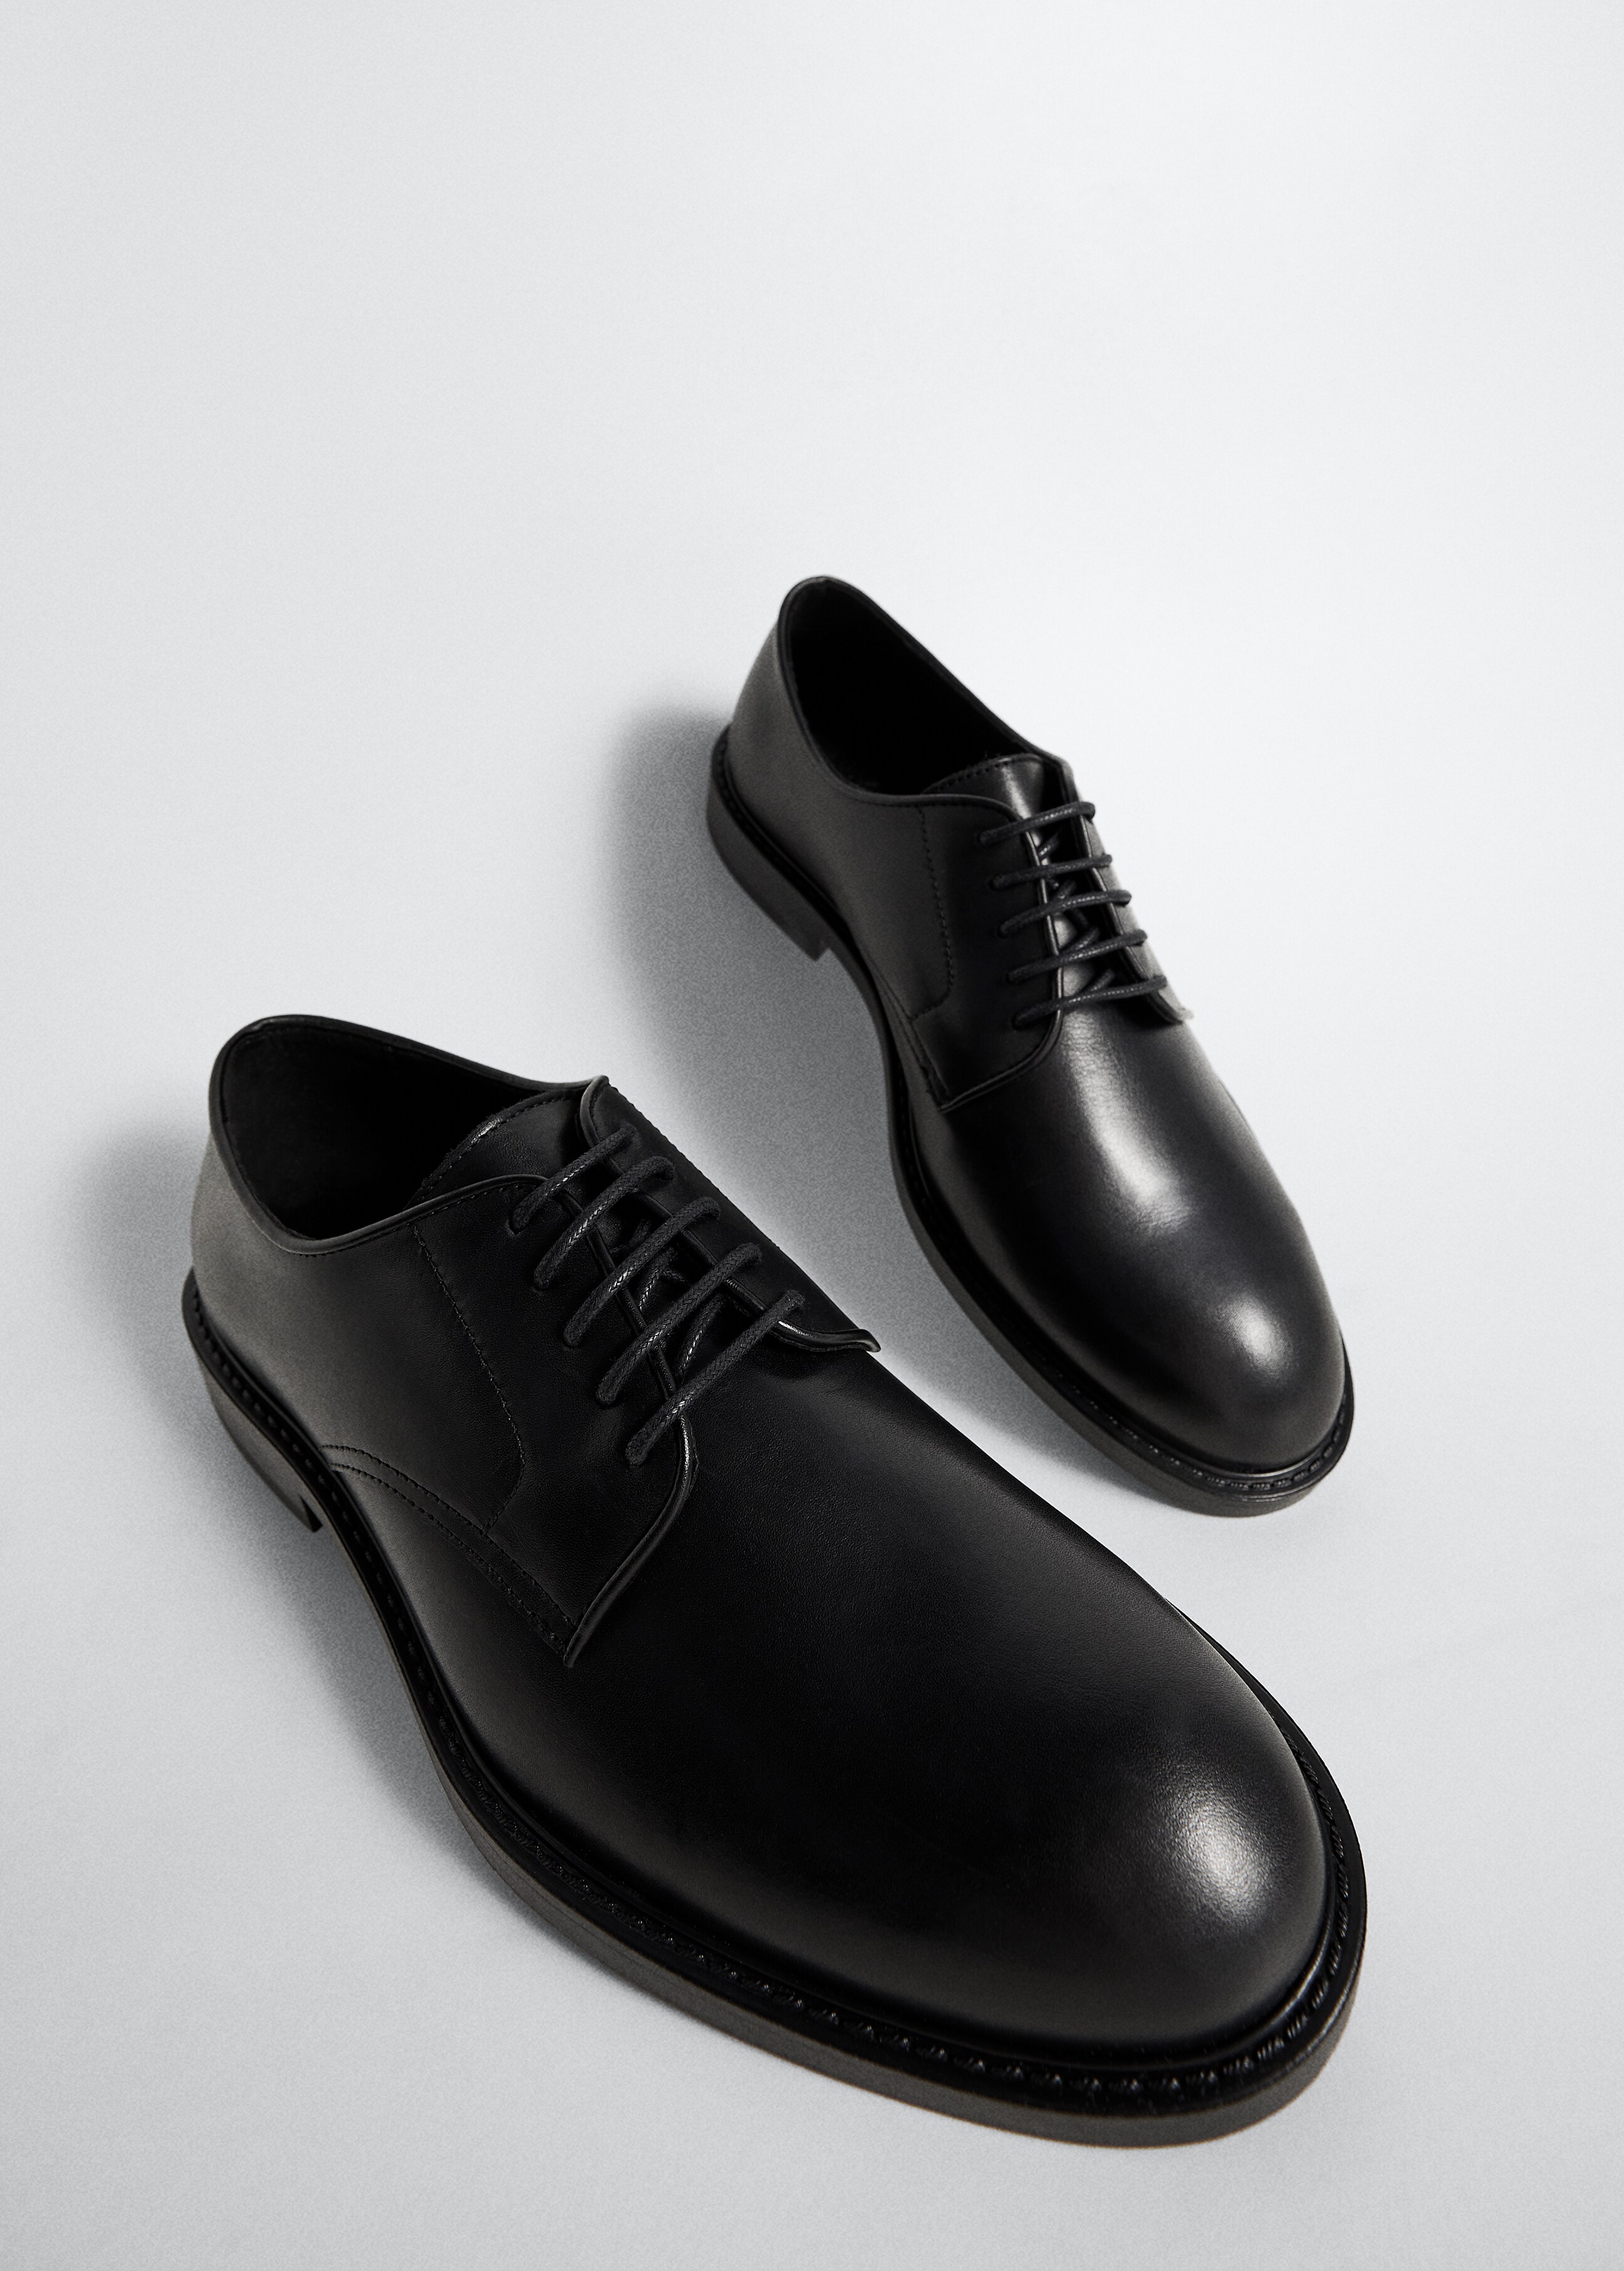 Leather suit shoes - Details of the article 5